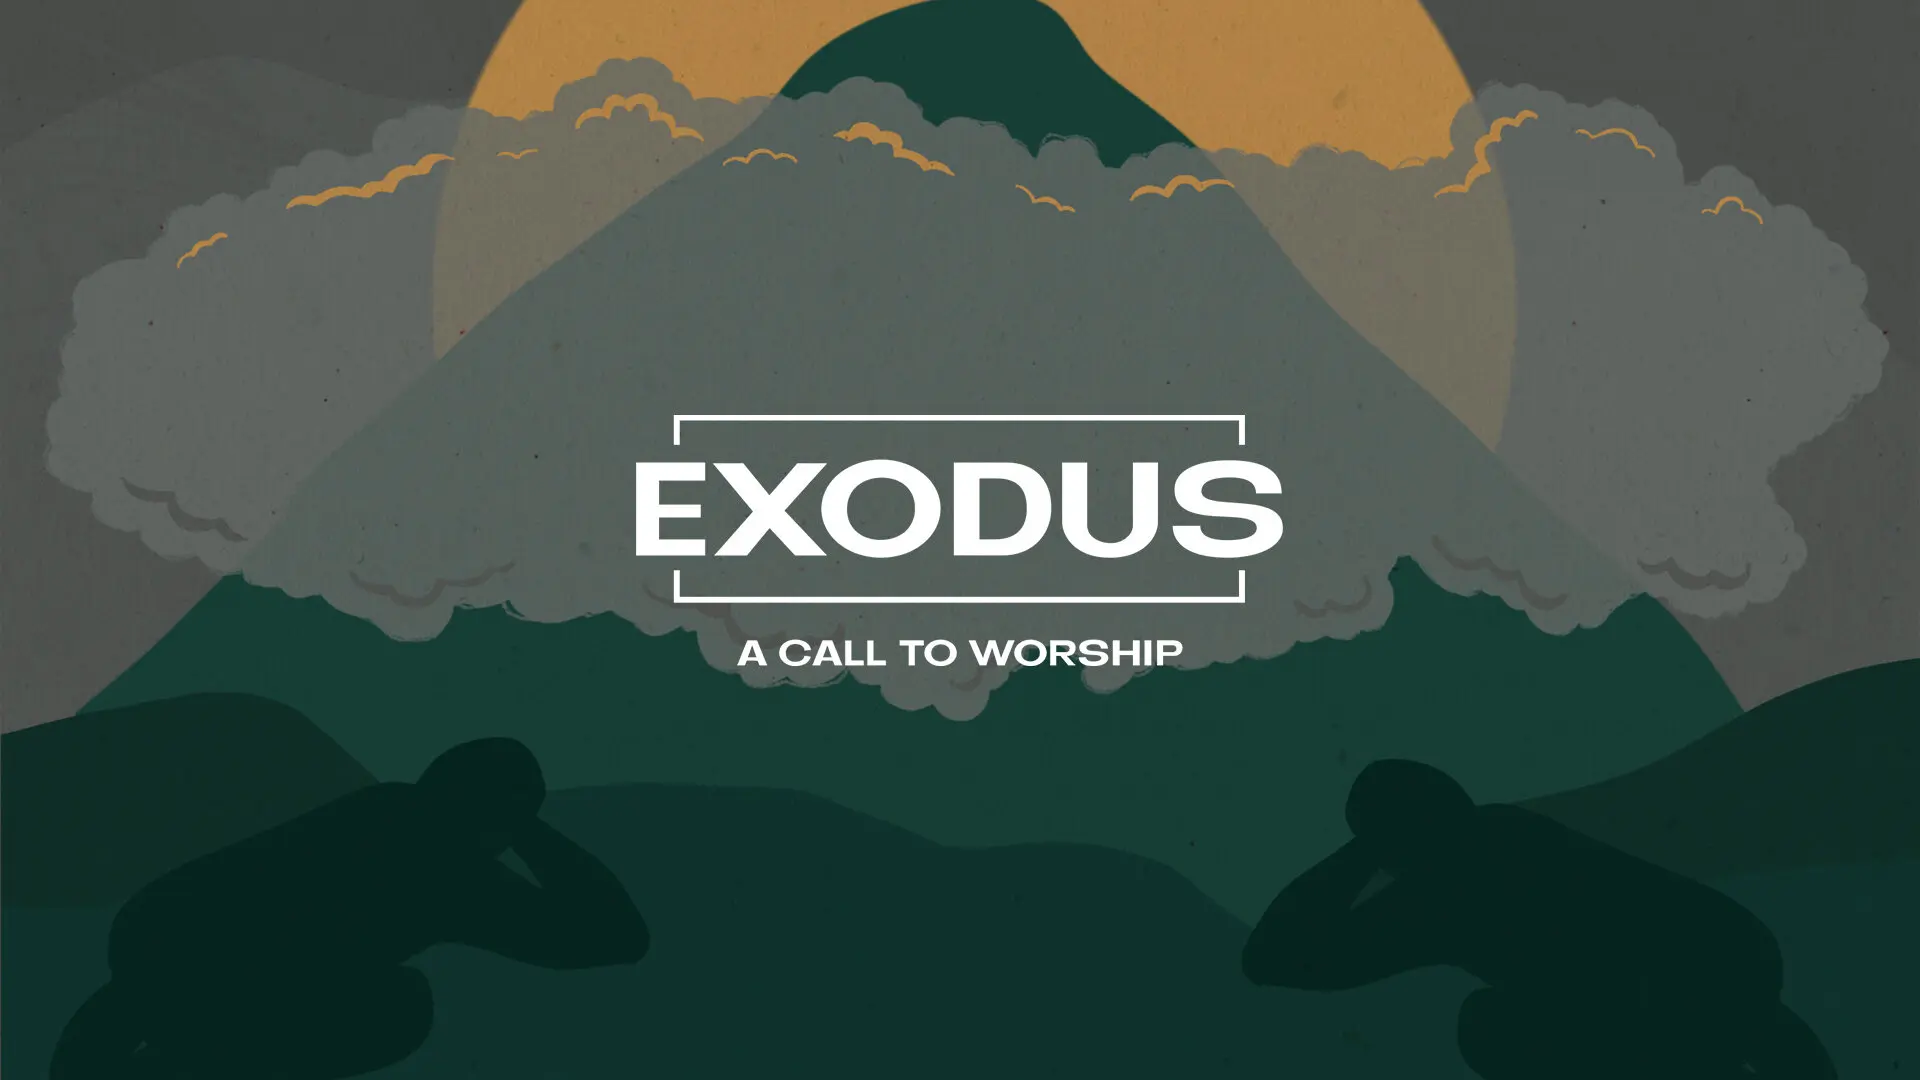 Exodus A Call To Worship Title Slide | Remix Church Media | Editable Design Templates And Resources Made For The Church.